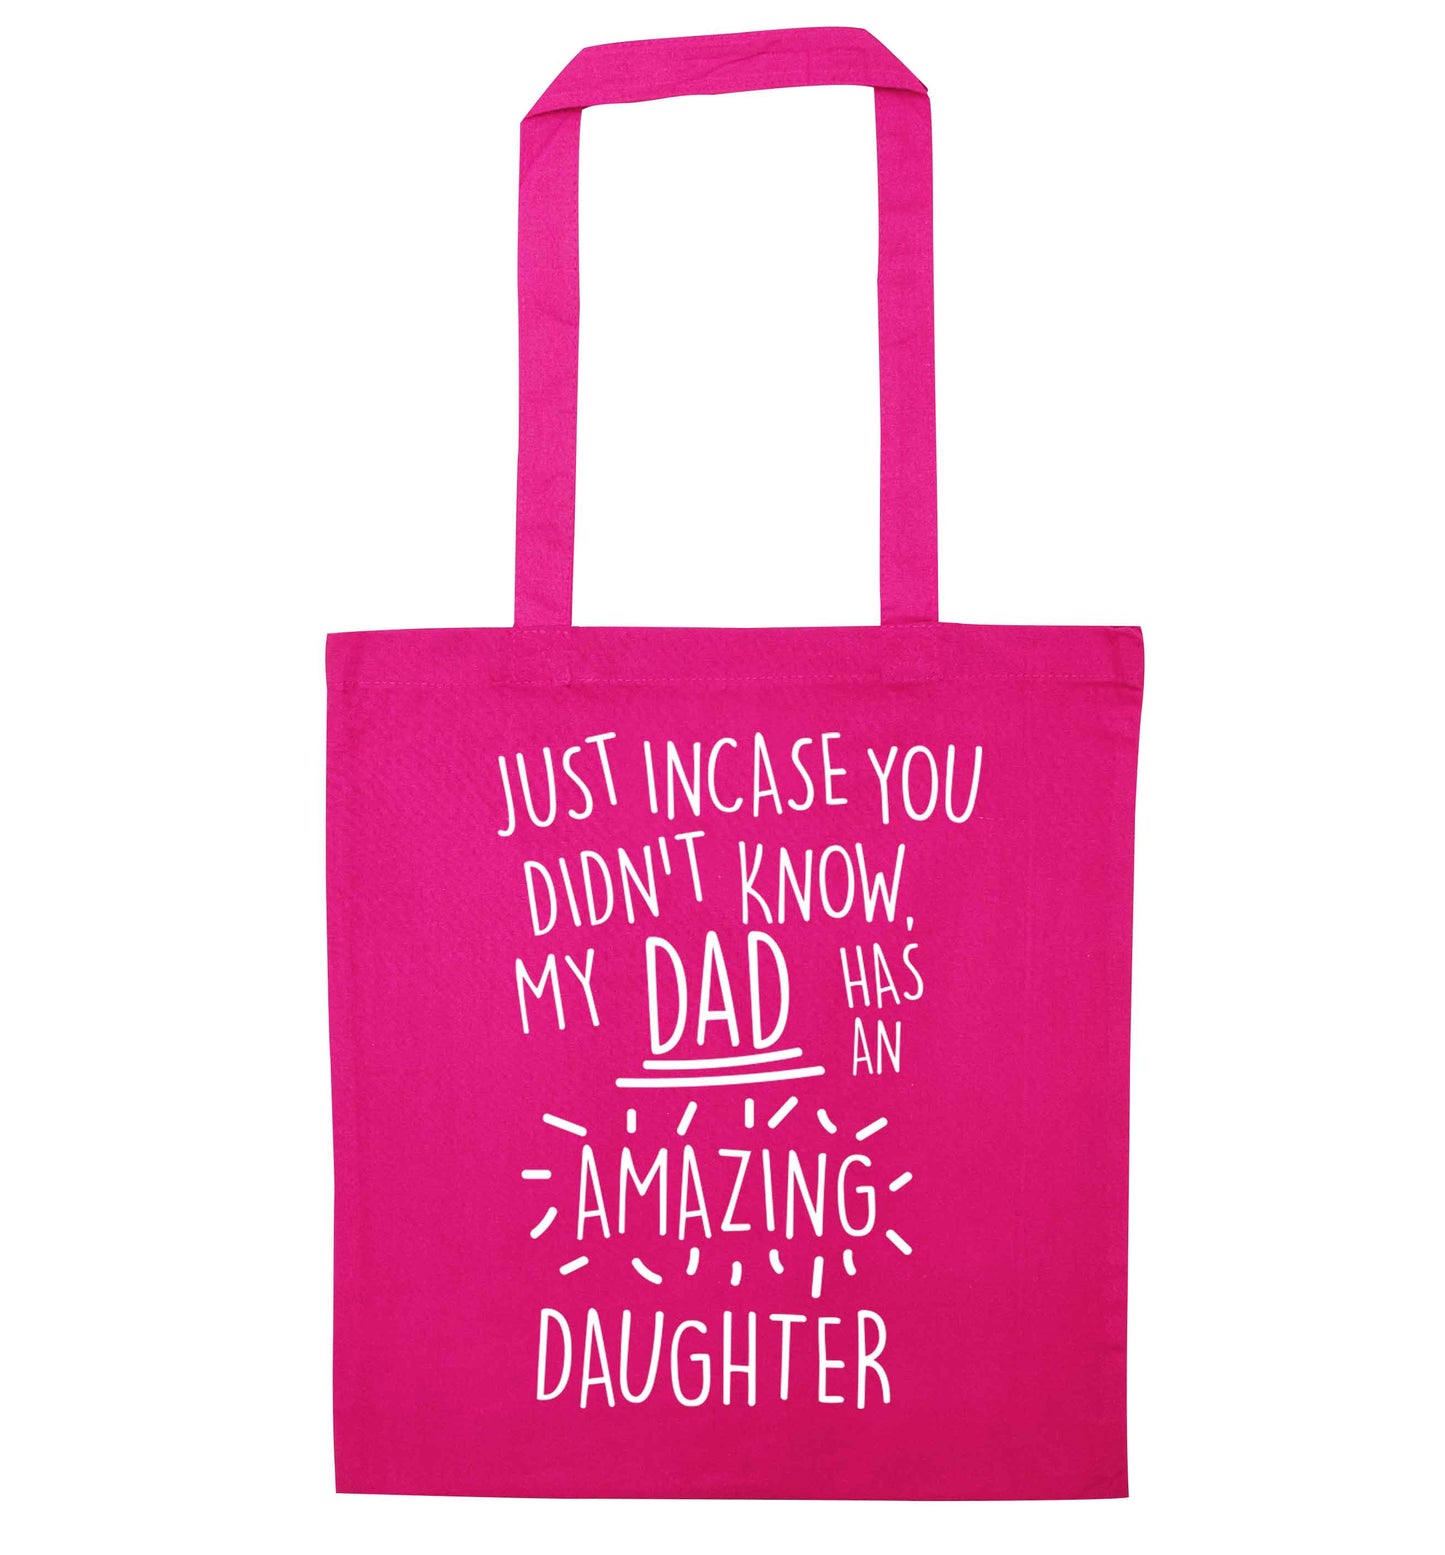 Just incase you didn't know my dad has an amazing daughter pink tote bag